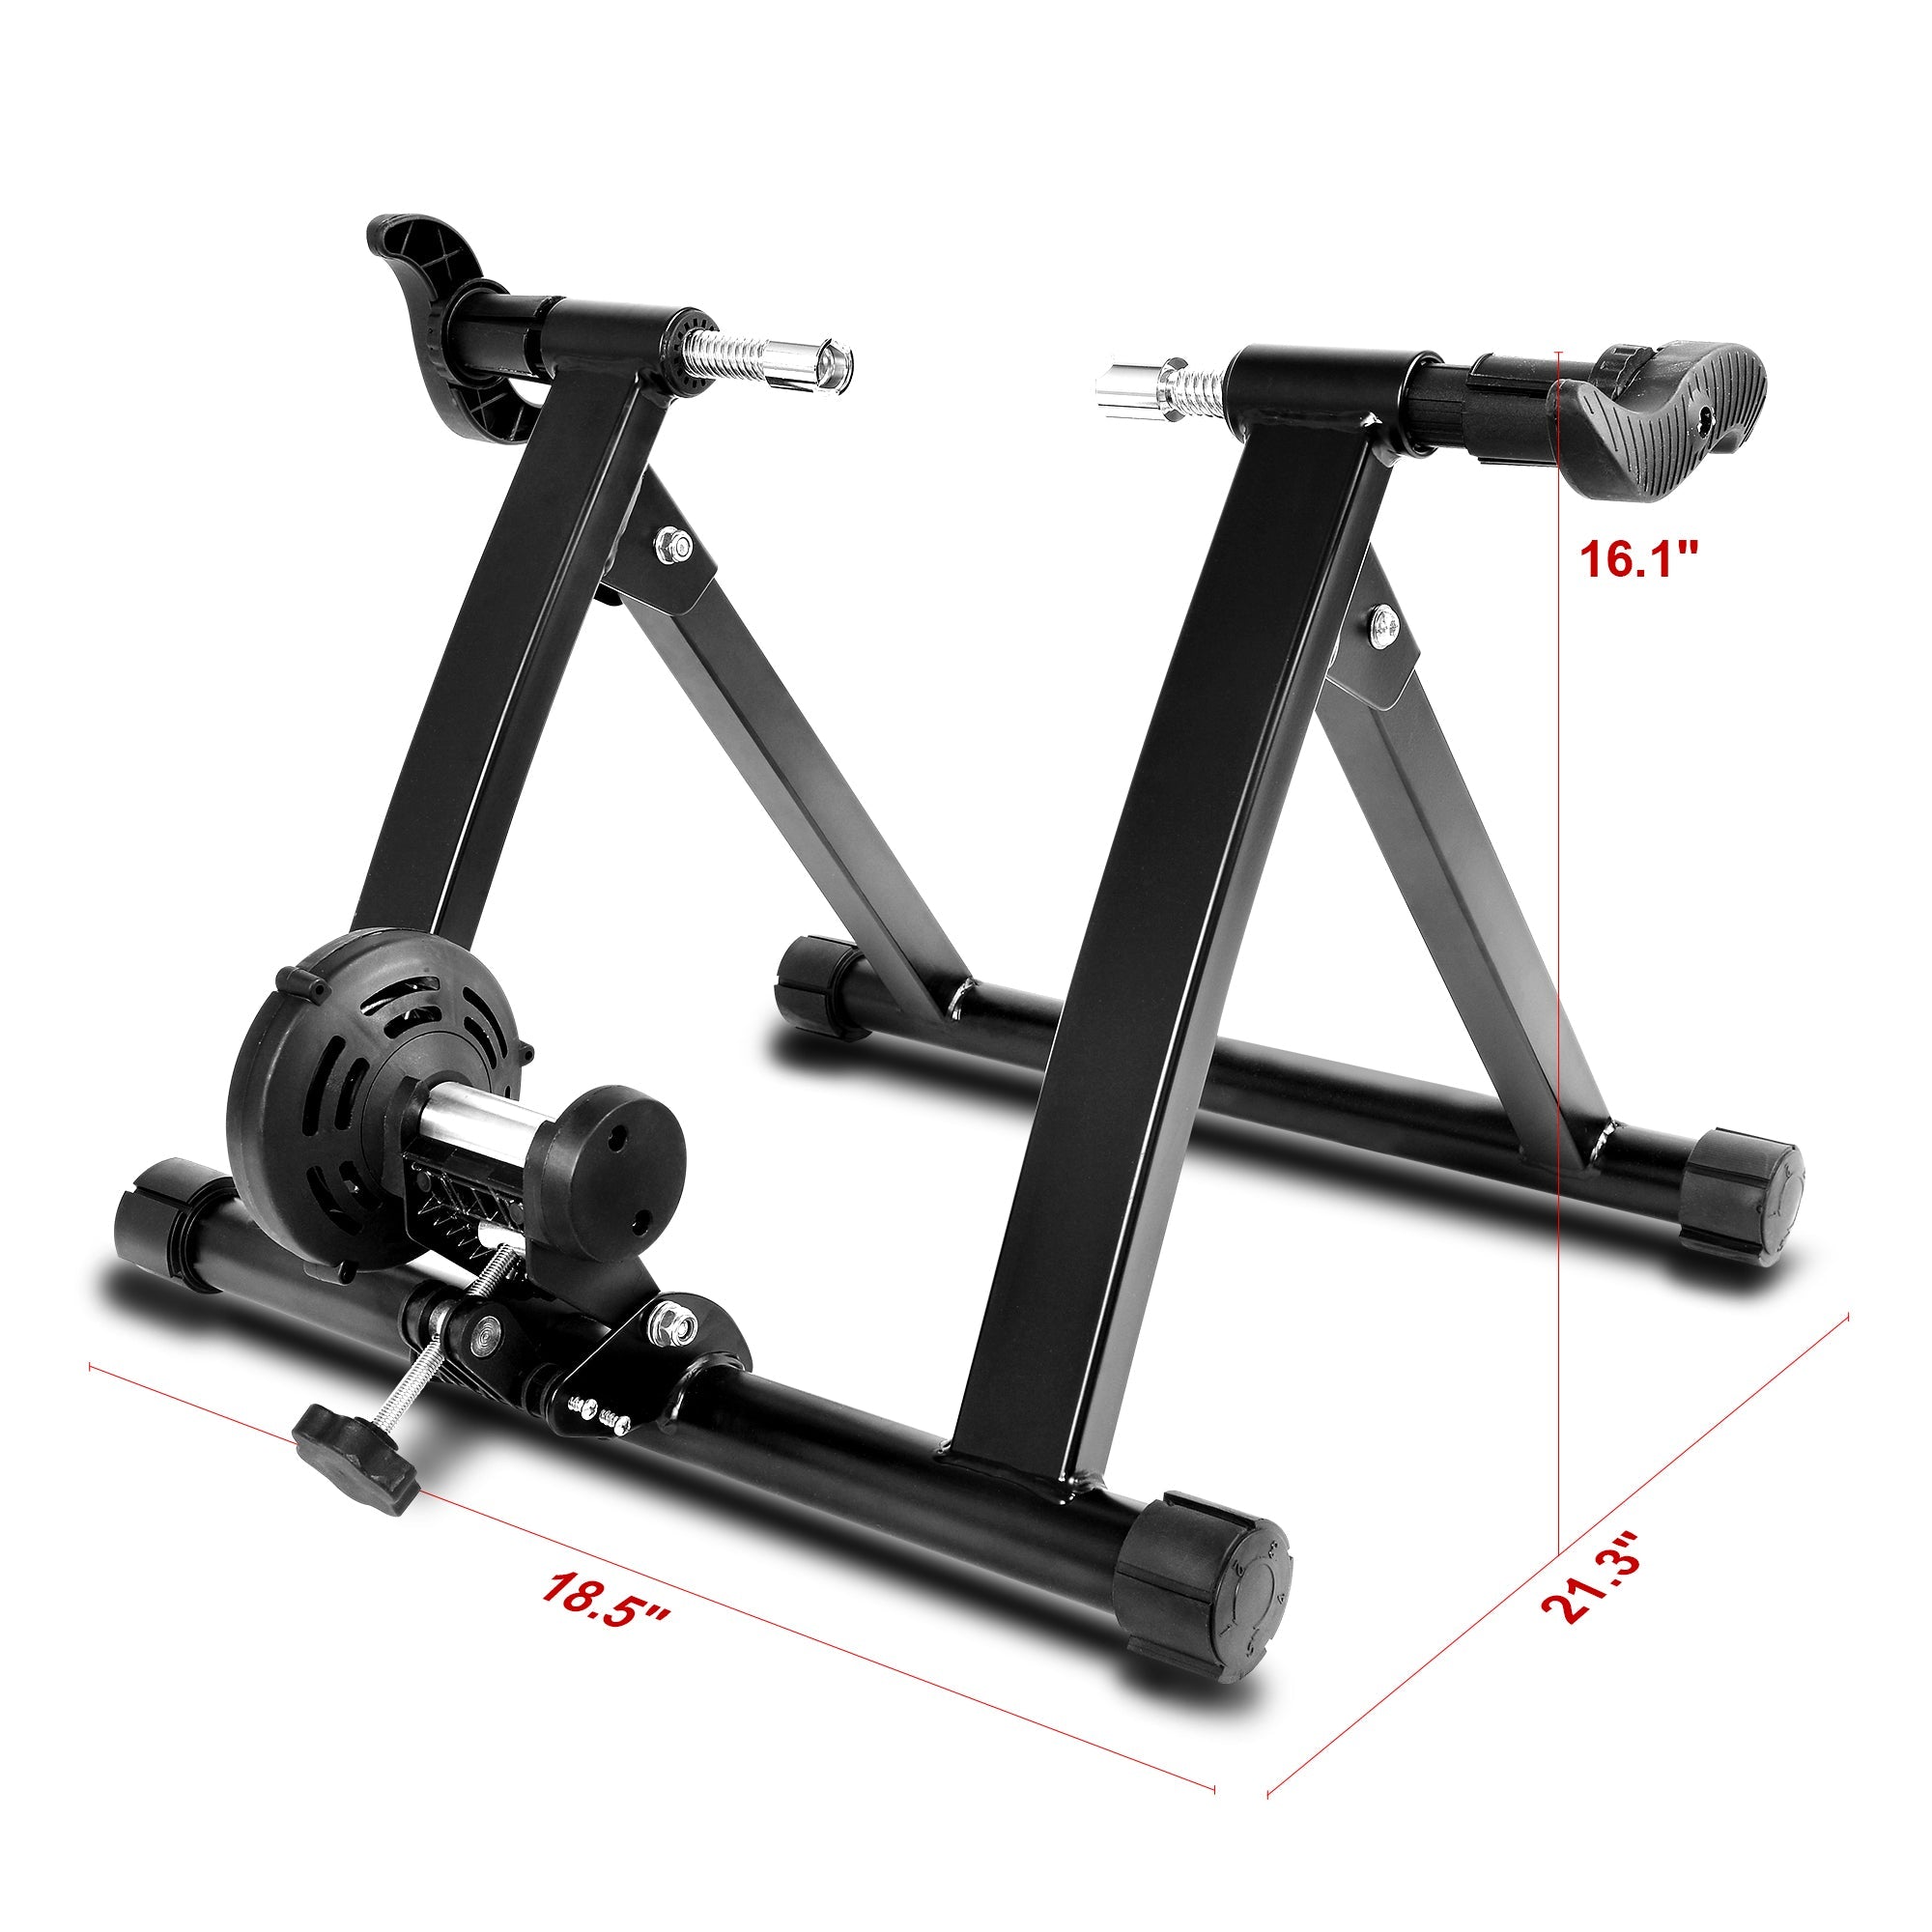 ROCKBROS Foldable Bike Trainer Stand for Indoor Cycling Exercise